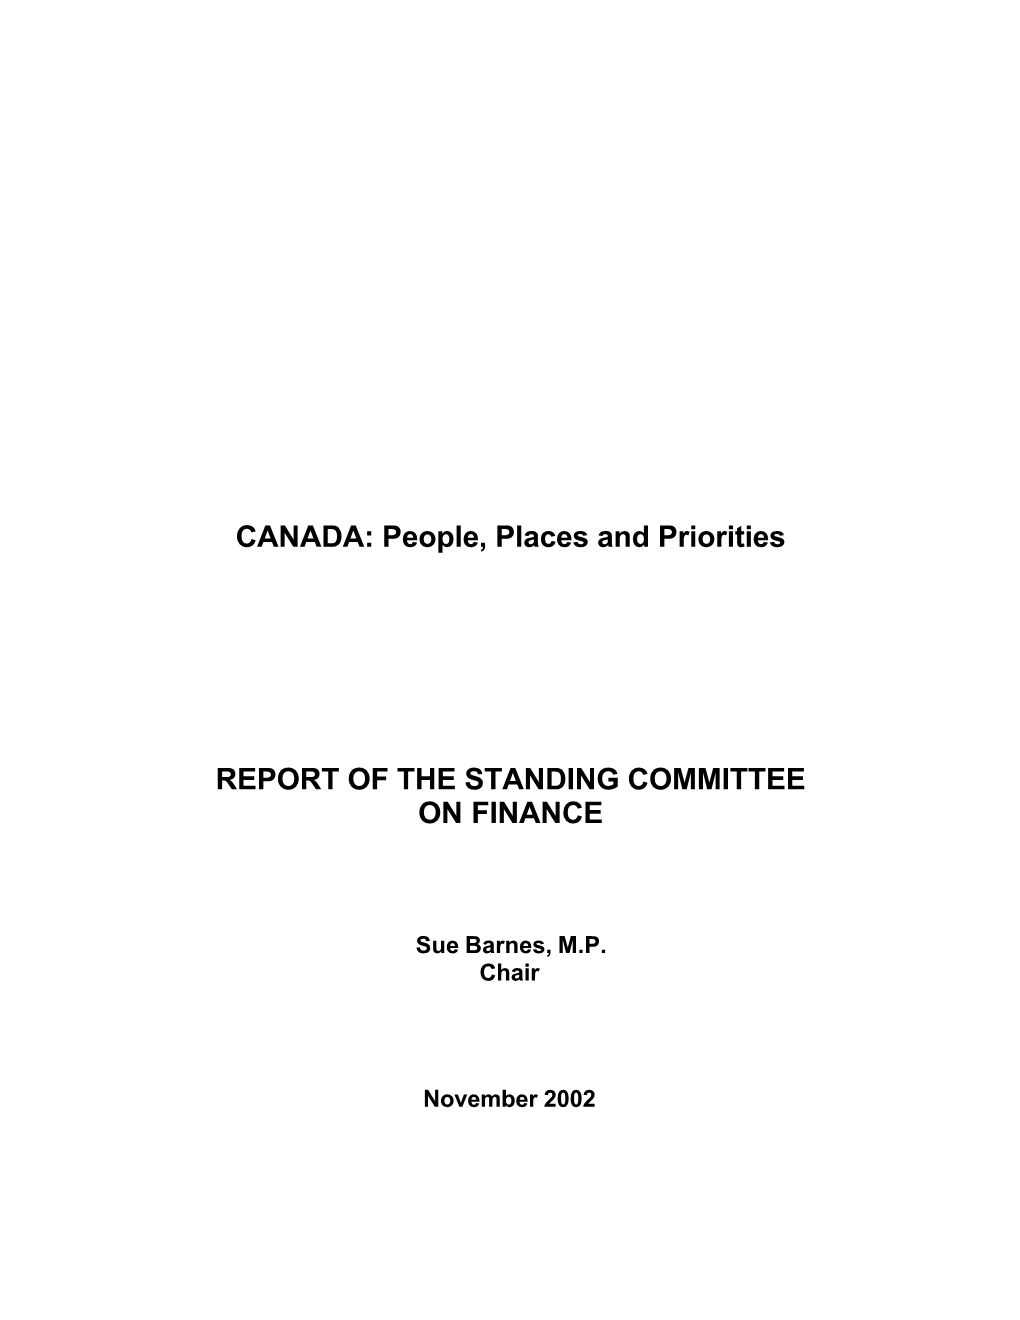 CANADA: People, Places and Priorities REPORT of the STANDING COMMITTEE on FINANCE